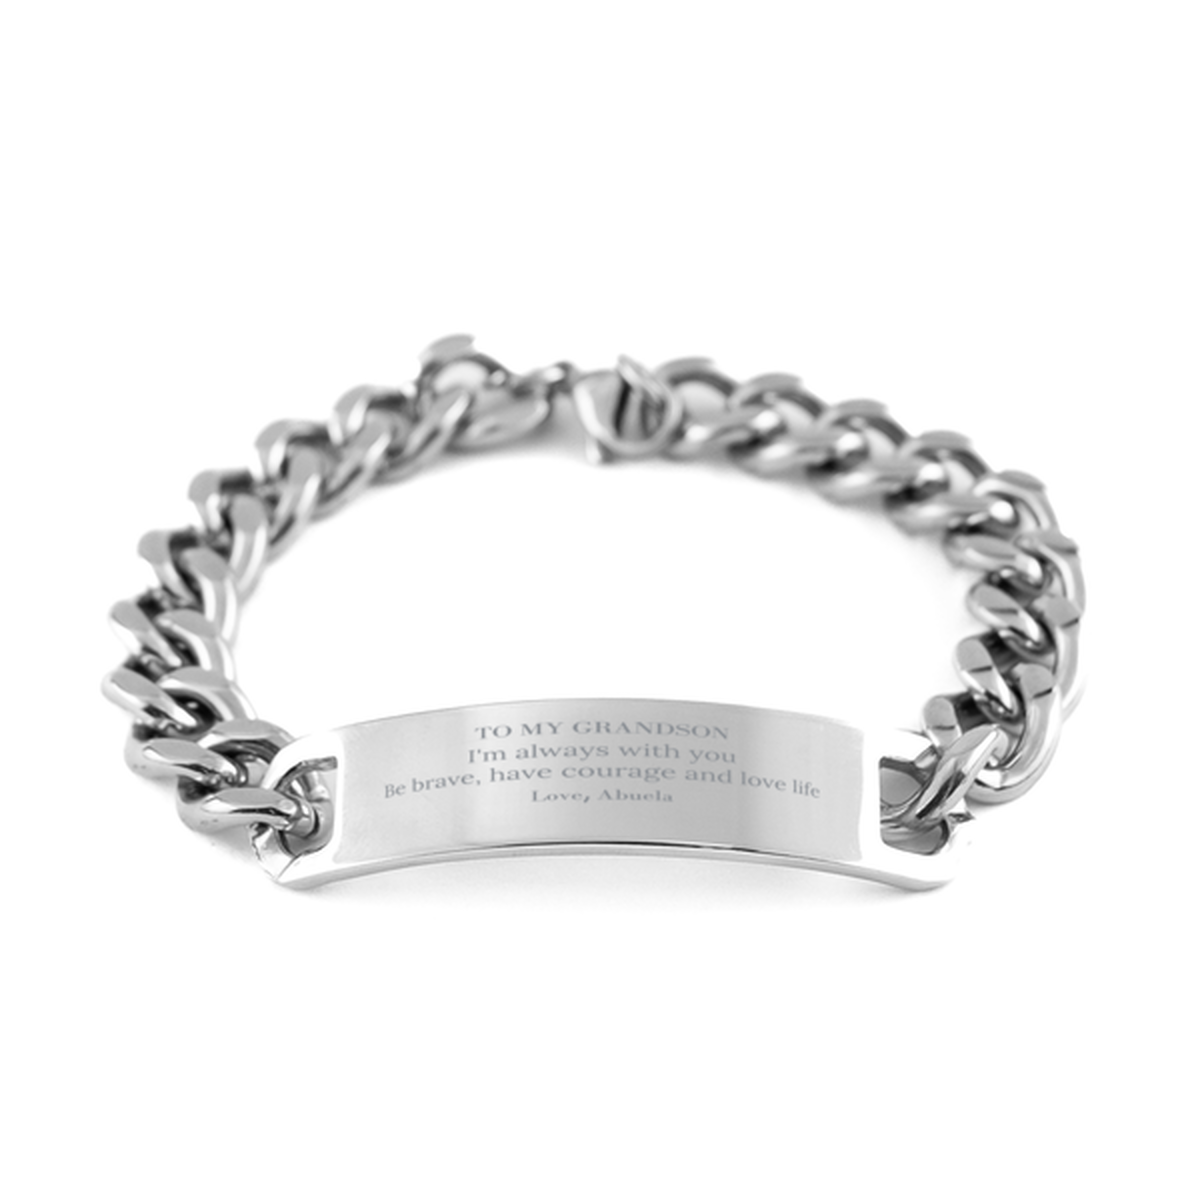 To My Grandson Gifts from Abuela, Unique Cuban Chain Stainless Steel Bracelet Inspirational Christmas Birthday Graduation Gifts for Grandson I'm always with you. Be brave, have courage and love life. Love, Abuela